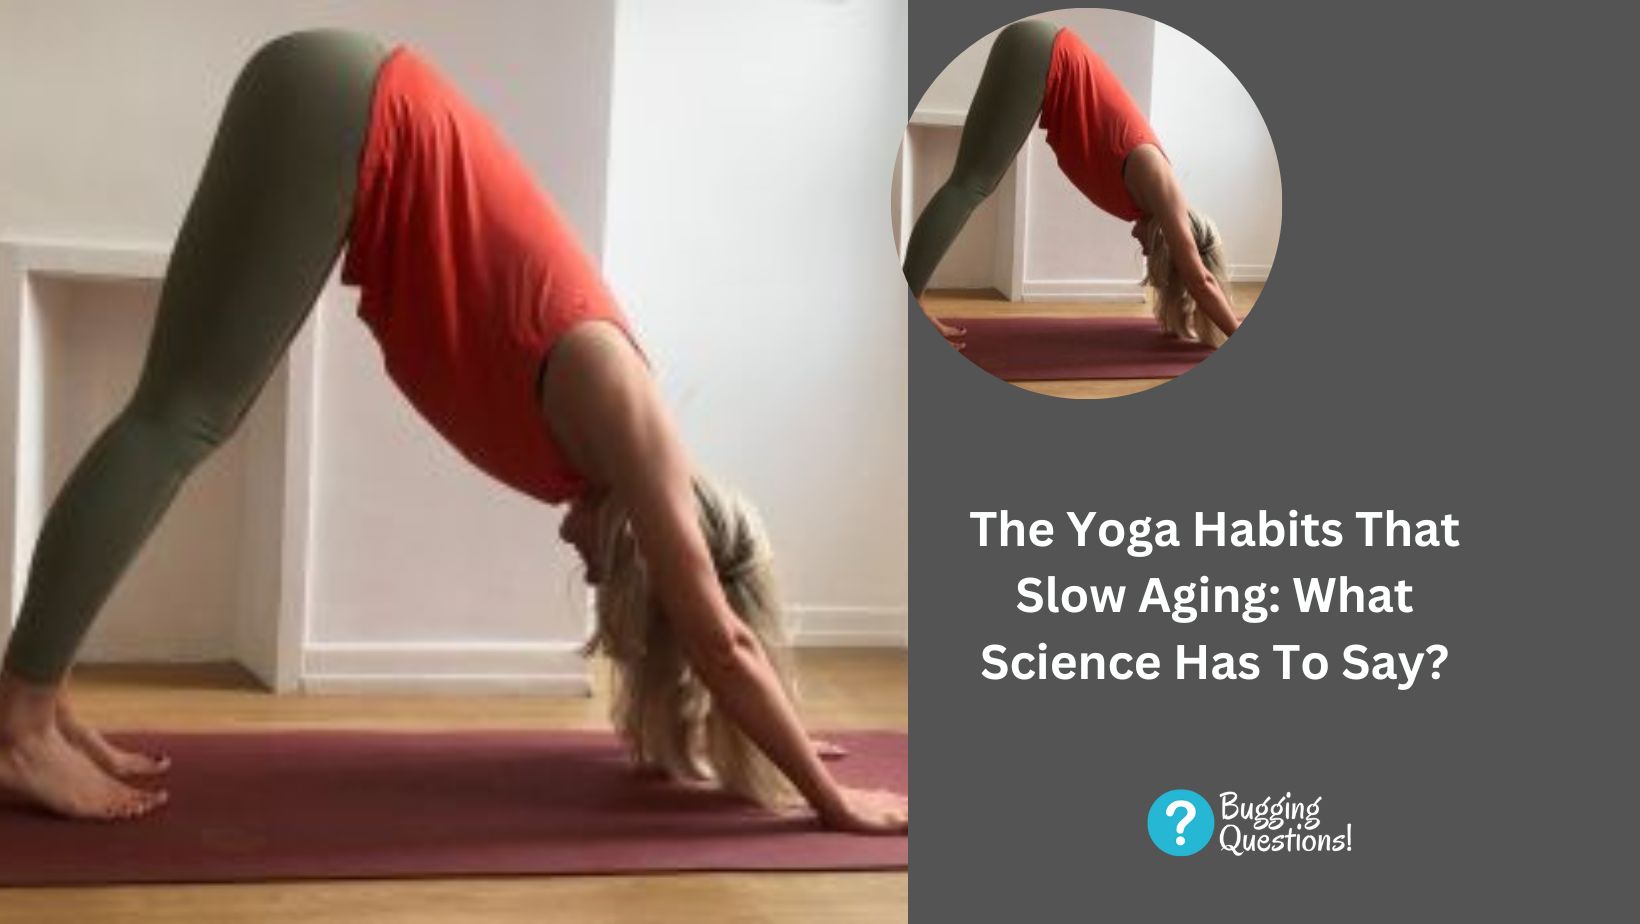 The Yoga Habits That Slow Aging: What Science Has To Say?